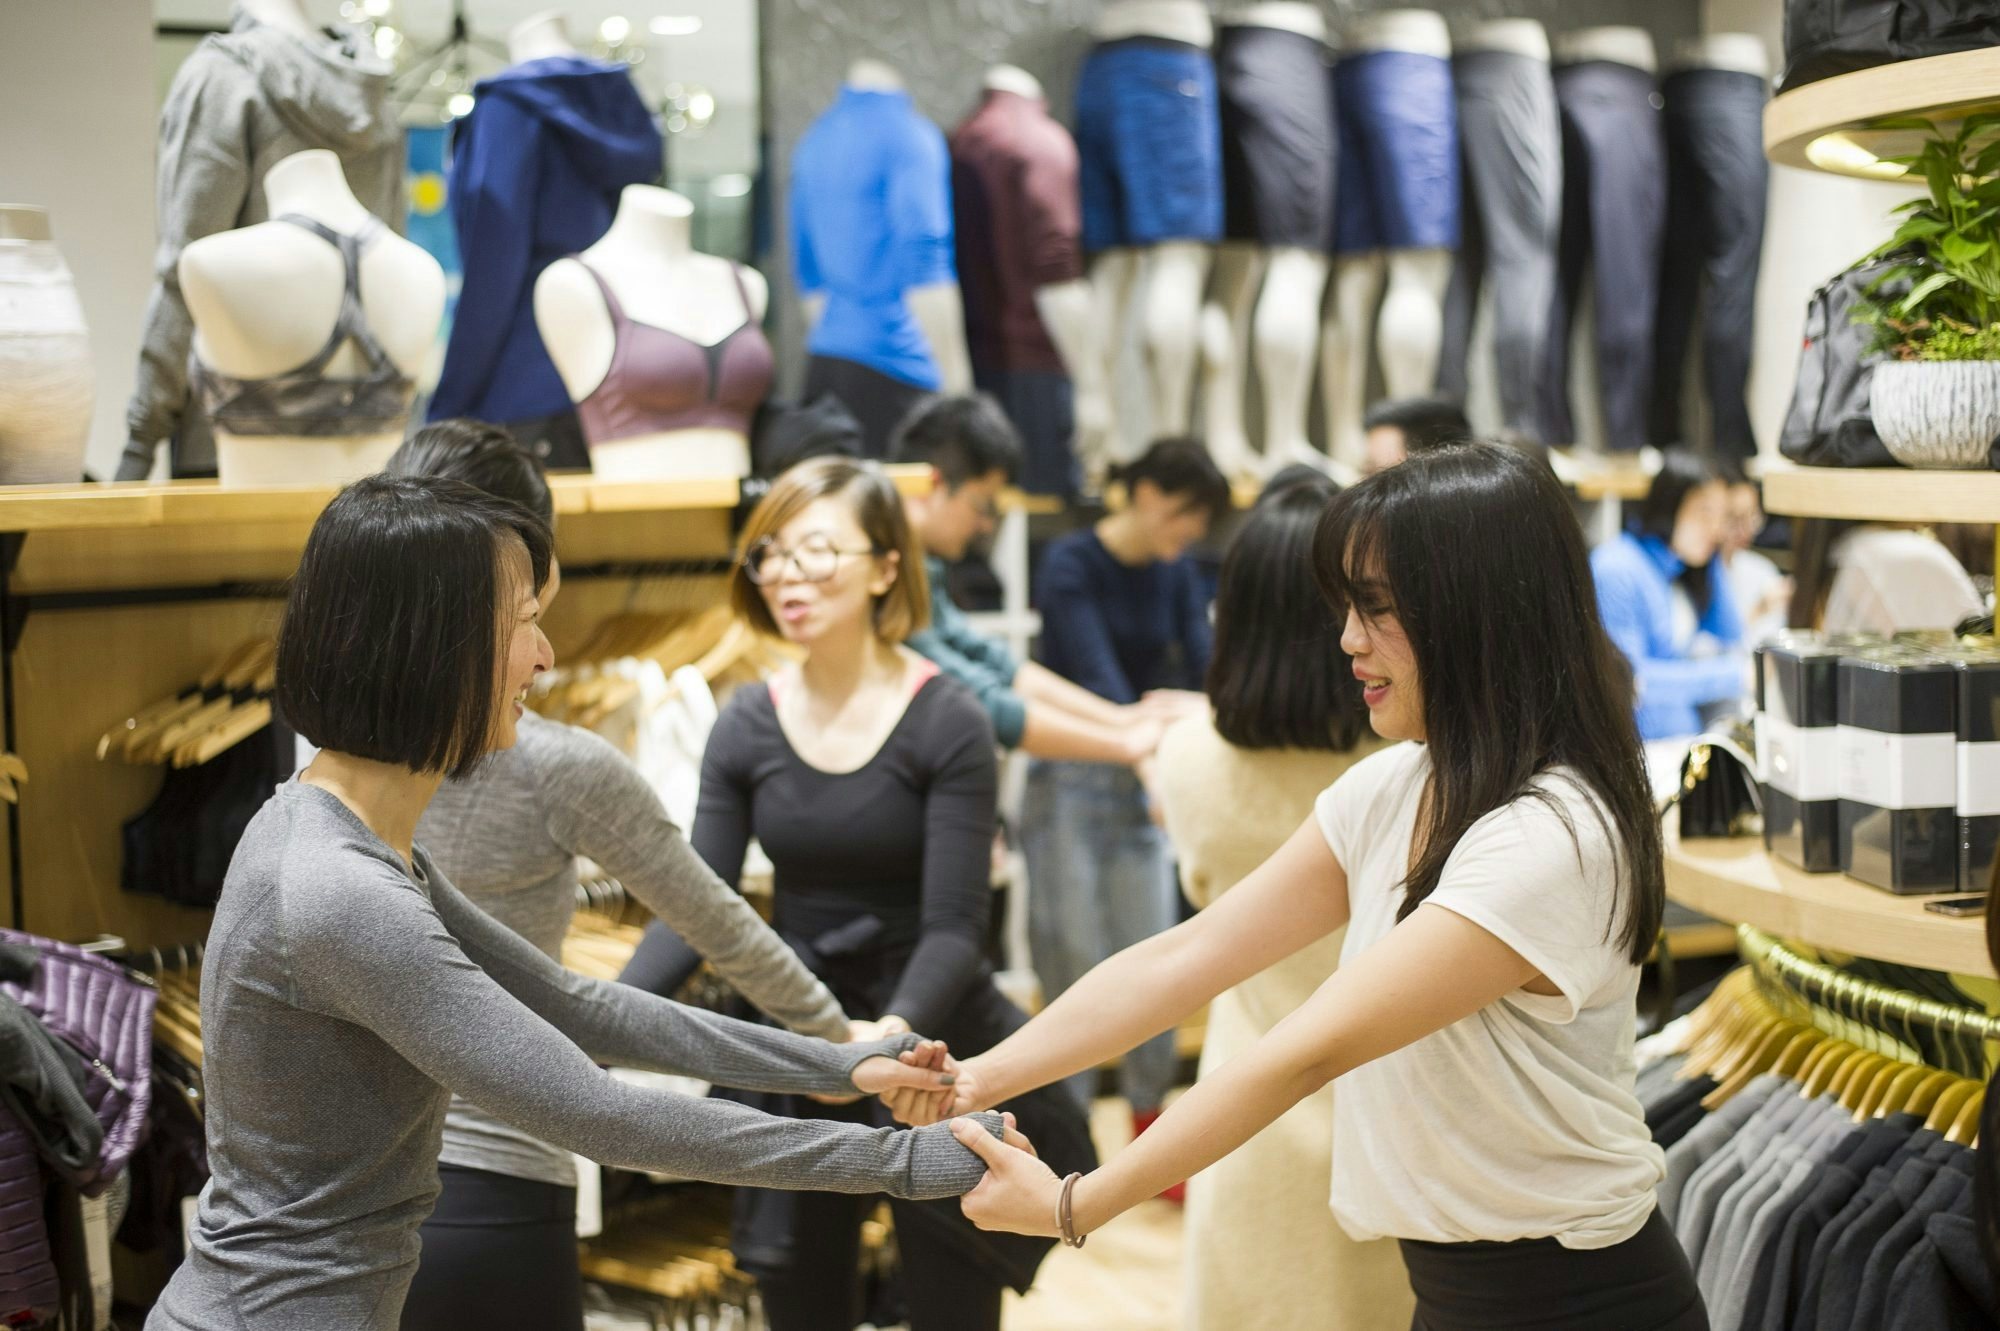 Shanghai's Lululemon fans participate in a group yoga and meditation activity at the brand's new store in IFC Mall. (Courtesy Photo)